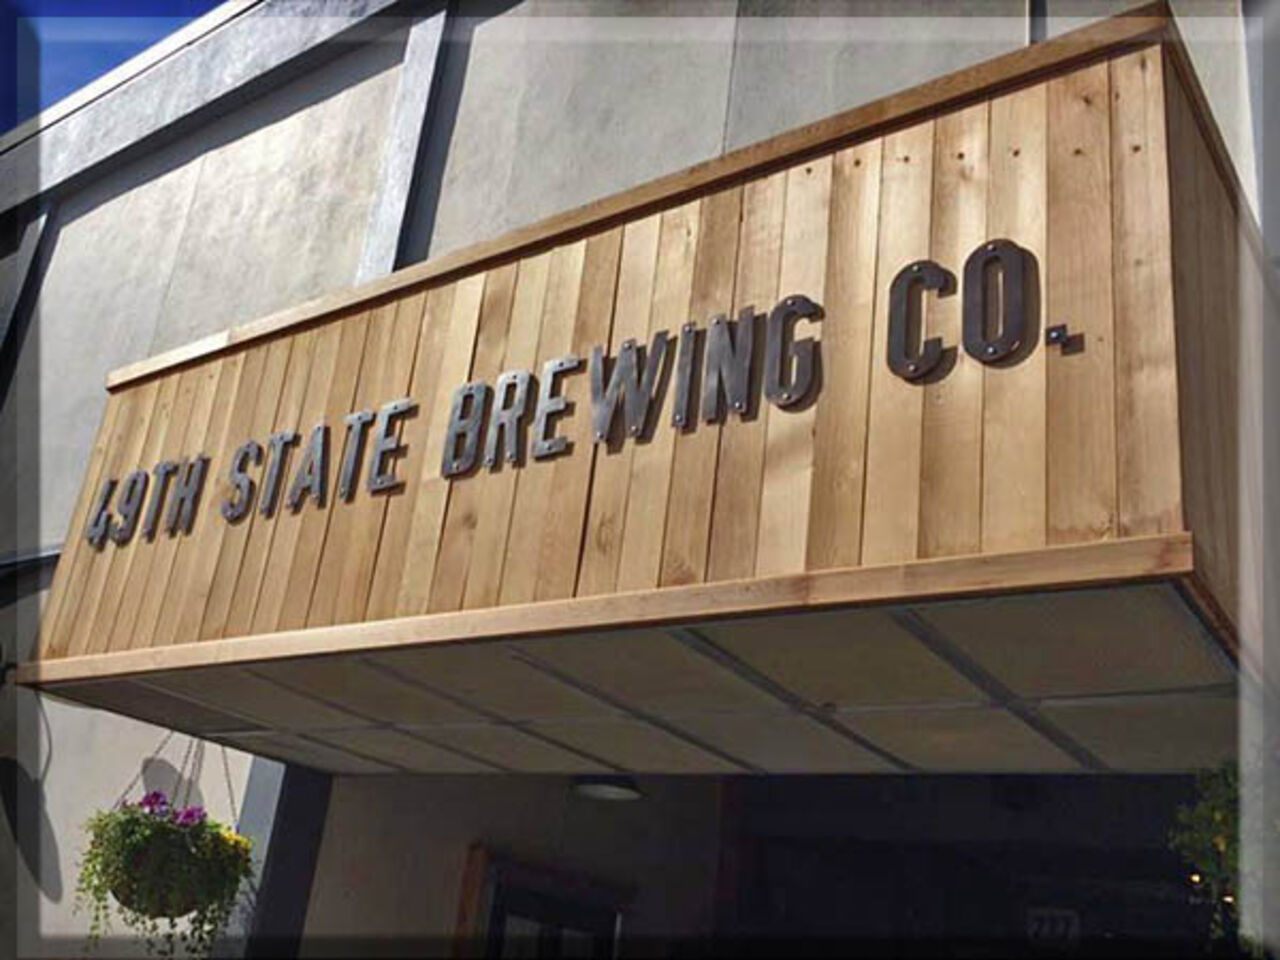 A photo of 49th State Brewing Company